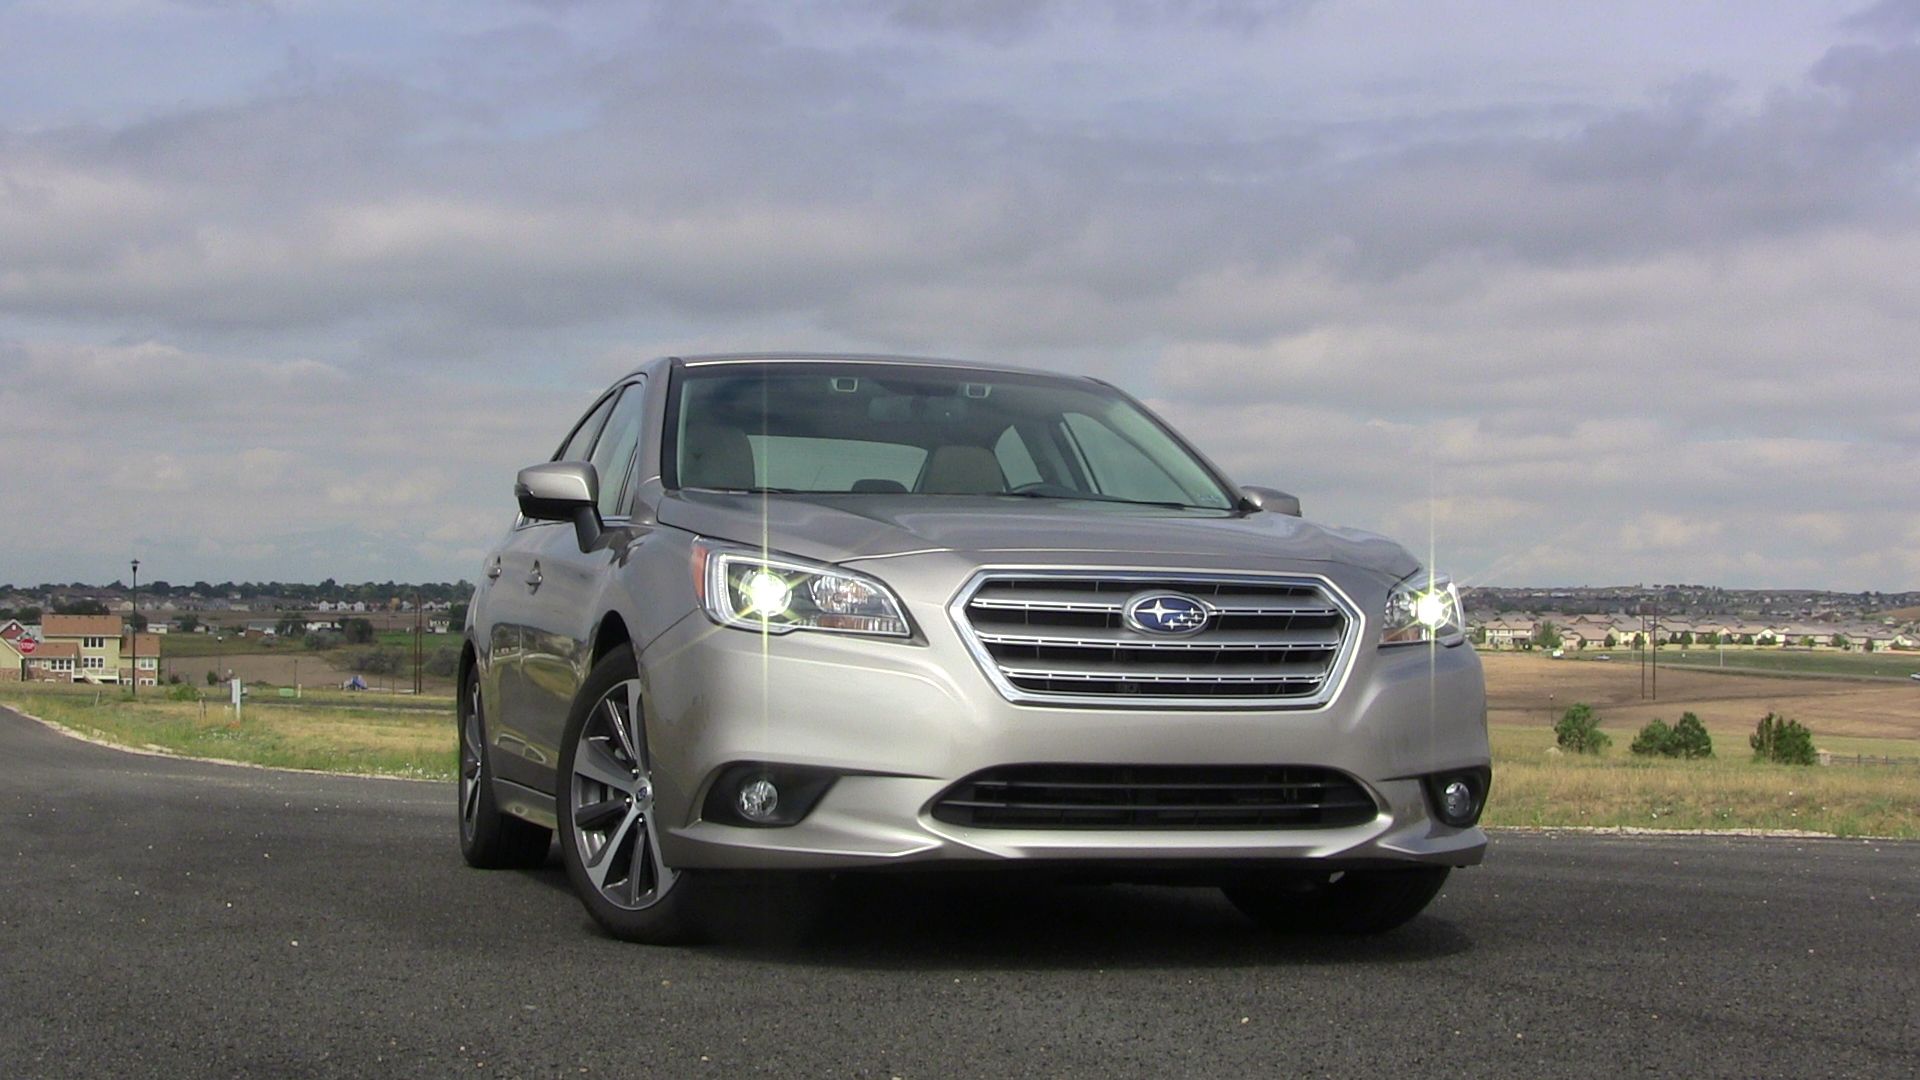 All-new 2015 Subaru Legacy 3.6R Limited - Comes out Fighting [Review